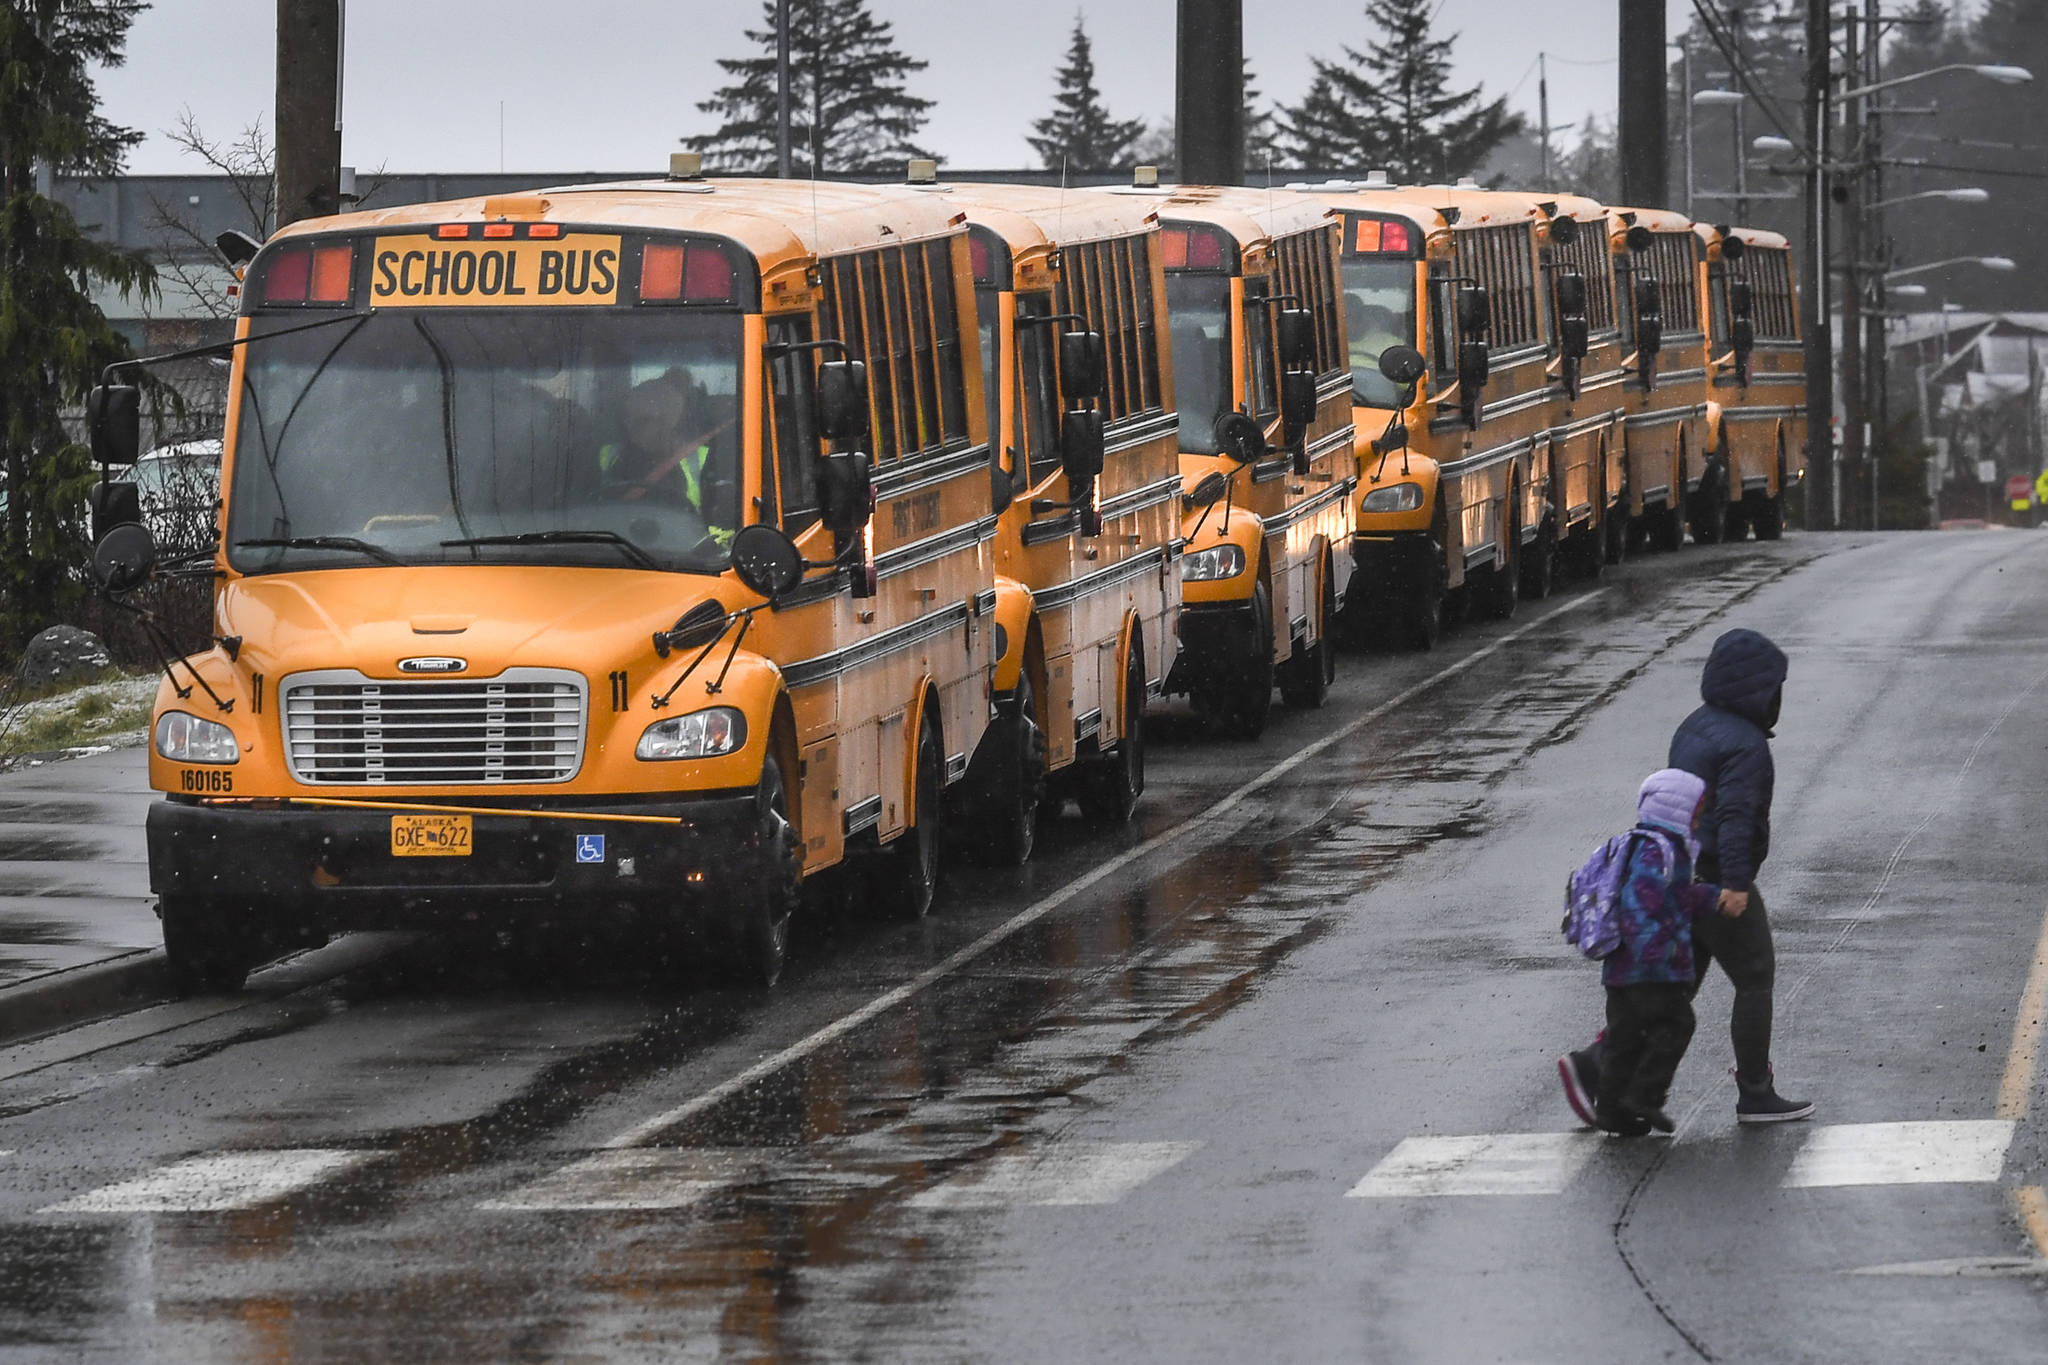 Michael Penn | Juneau Empire File                                School buses line up for students at Harborview Elementary School in December 2019.